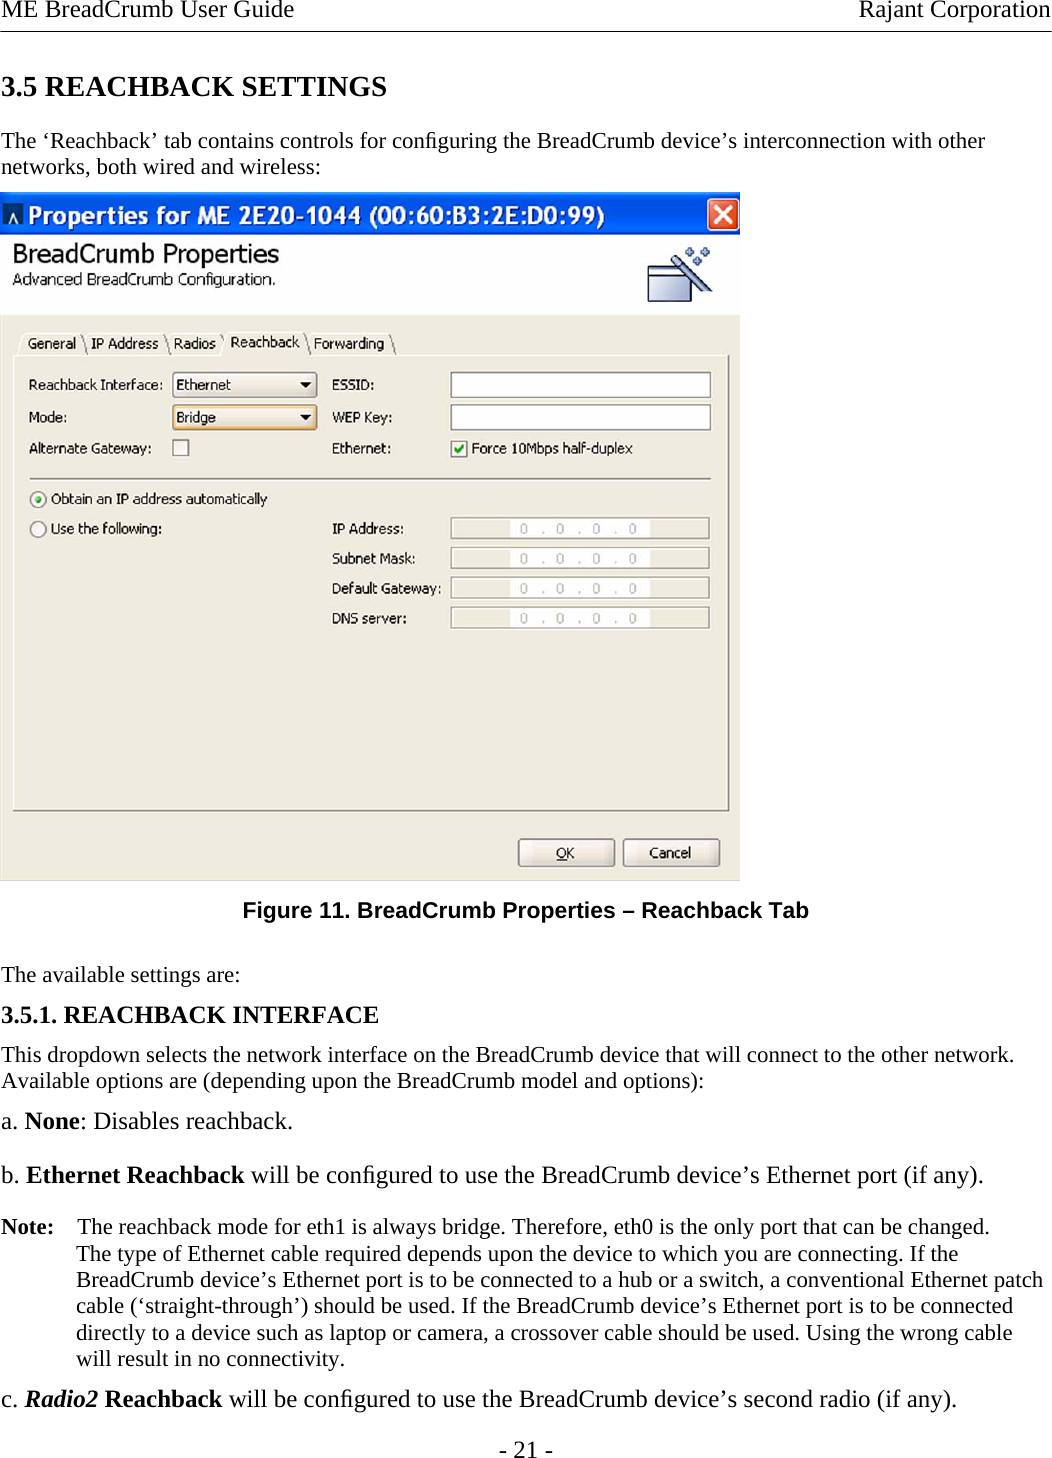 ME BreadCrumb User Guide  Rajant Corporation 3.5 REACHBACK SETTINGS  The ‘Reachback’ tab contains controls for conﬁguring the BreadCrumb device’s interconnection with other networks, both wired and wireless:   Figure 11. BreadCrumb Properties – Reachback Tab The available settings are:  3.5.1. REACHBACK INTERFACE  This dropdown selects the network interface on the BreadCrumb device that will connect to the other network. Available options are (depending upon the BreadCrumb model and options):  a. None: Disables reachback. b. Ethernet Reachback will be conﬁgured to use the BreadCrumb device’s Ethernet port (if any).  Note:    The reachback mode for eth1 is always bridge. Therefore, eth0 is the only port that can be changed. The type of Ethernet cable required depends upon the device to which you are connecting. If the BreadCrumb device’s Ethernet port is to be connected to a hub or a switch, a conventional Ethernet patch cable (‘straight-through’) should be used. If the BreadCrumb device’s Ethernet port is to be connected directly to a device such as laptop or camera, a crossover cable should be used. Using the wrong cable will result in no connectivity.  c. Radio2 Reachback will be conﬁgured to use the BreadCrumb device’s second radio (if any).  - 21 - 